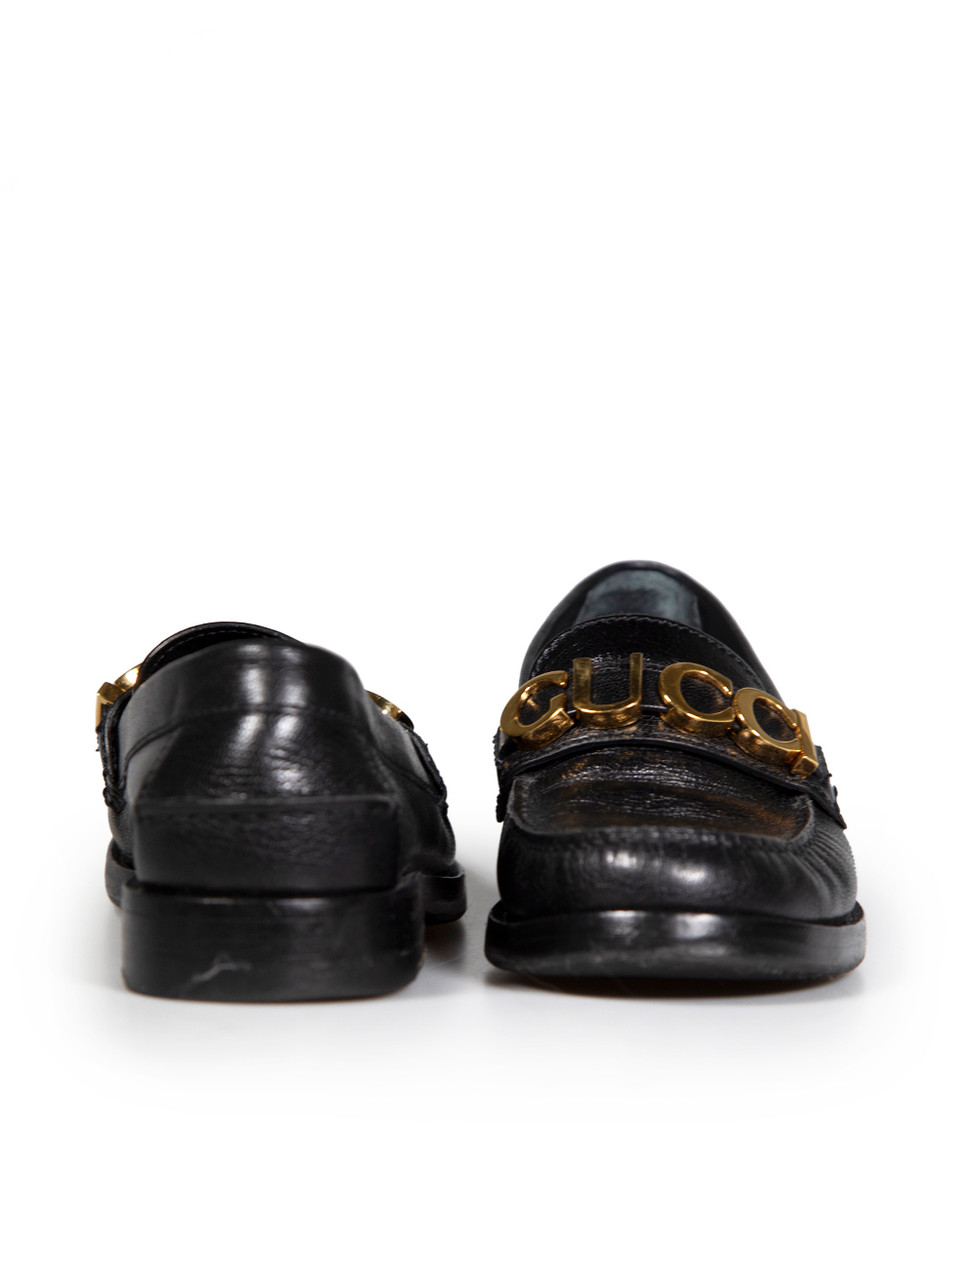 Gucci Black Leather Logo Loafers